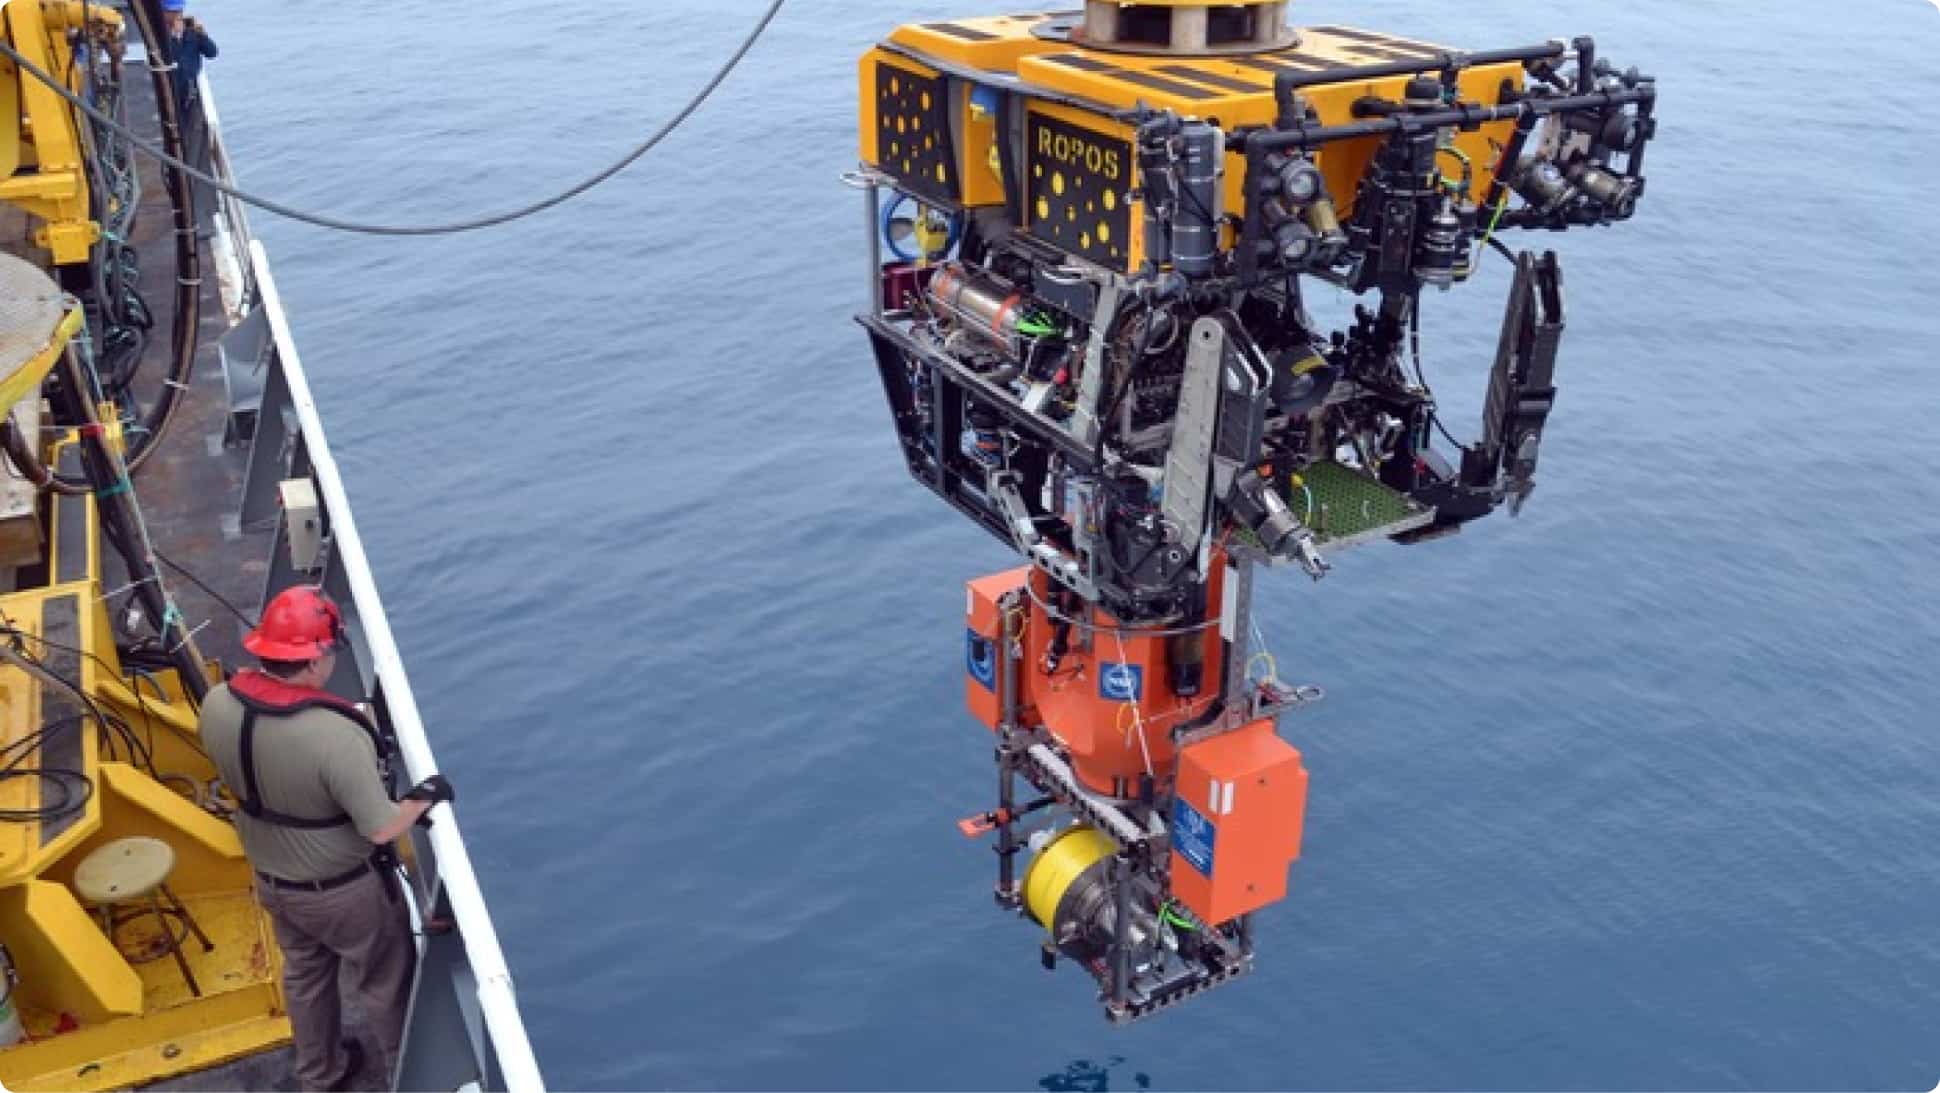 An underwater Remote Operated Vehicle (ROV) is lowered into the ocean from a large research vessel as a person in a hard hat watches, a large profiler instrument is attached to the bottom of the ROV